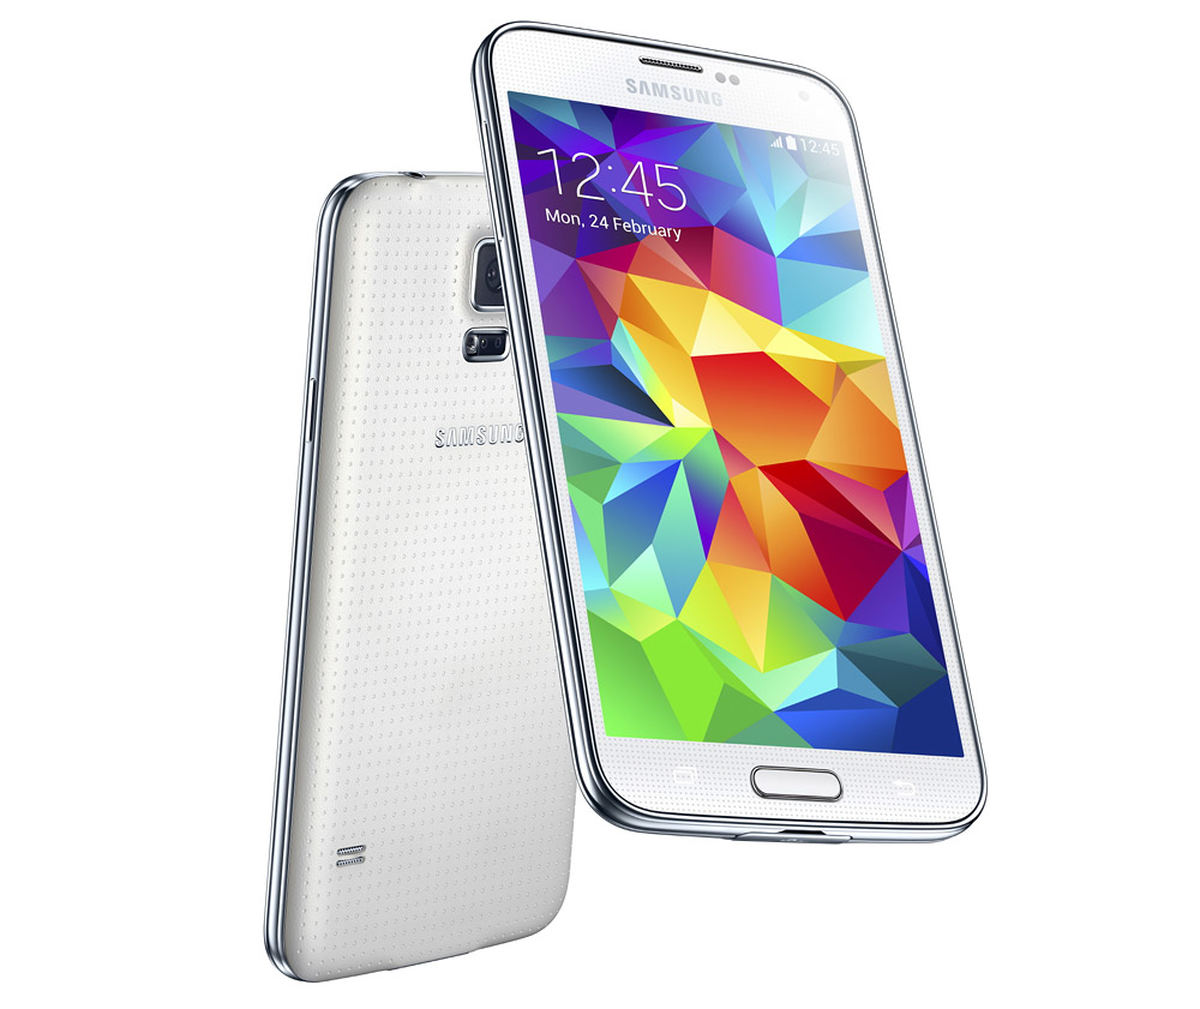 Samsung Galaxy S5 mini : Specifications and Opinions | JuzaPhoto